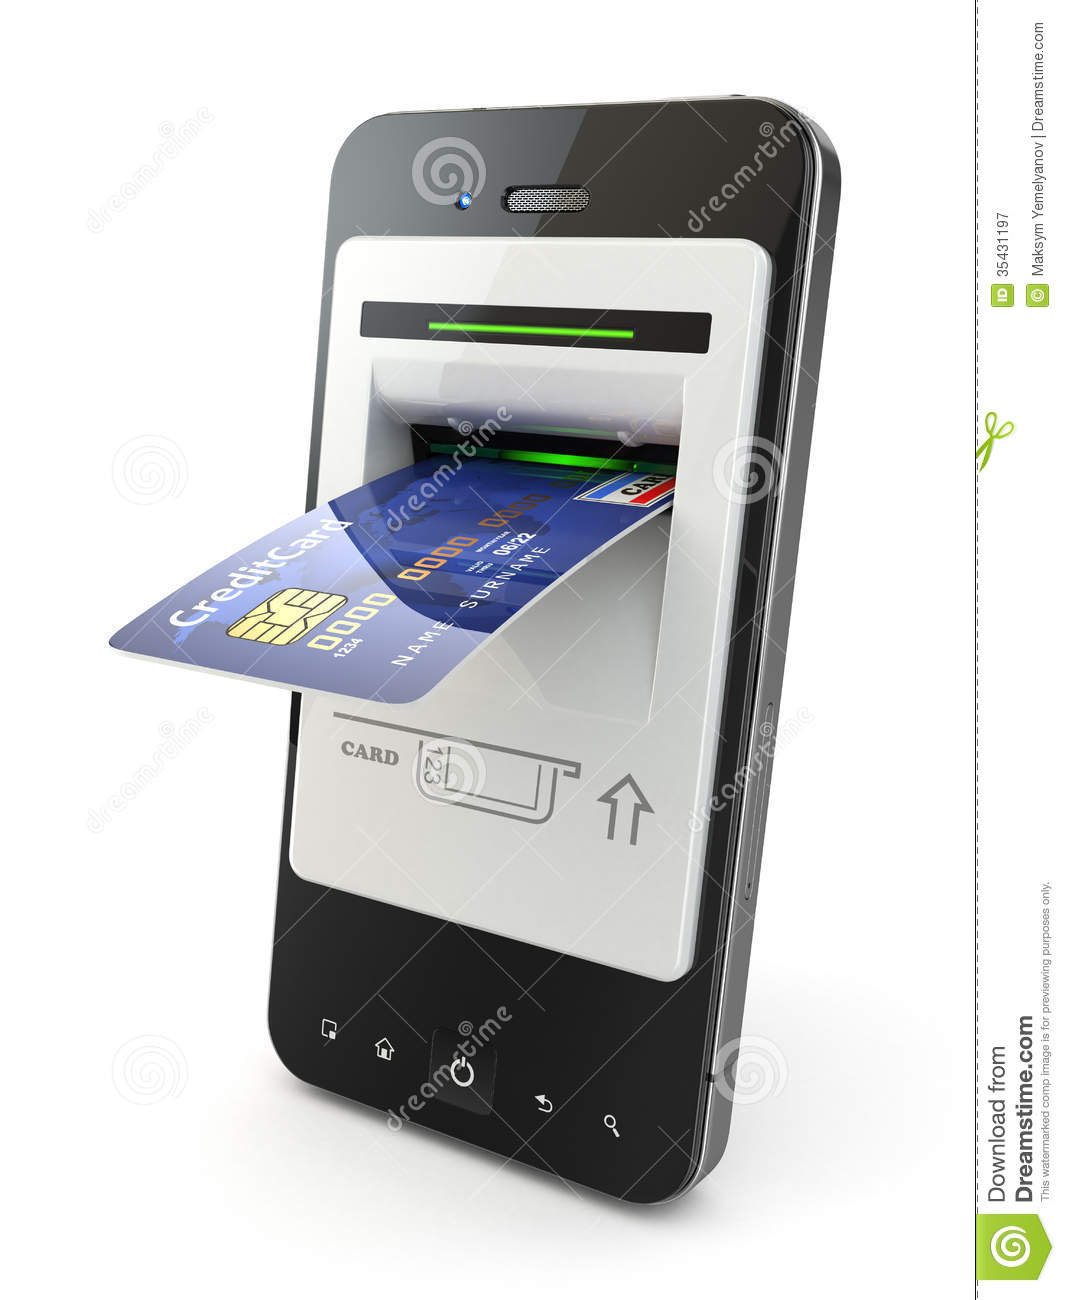 Mobile Banking  Mobile Phone As Atm And Credit Card  Royalty Free